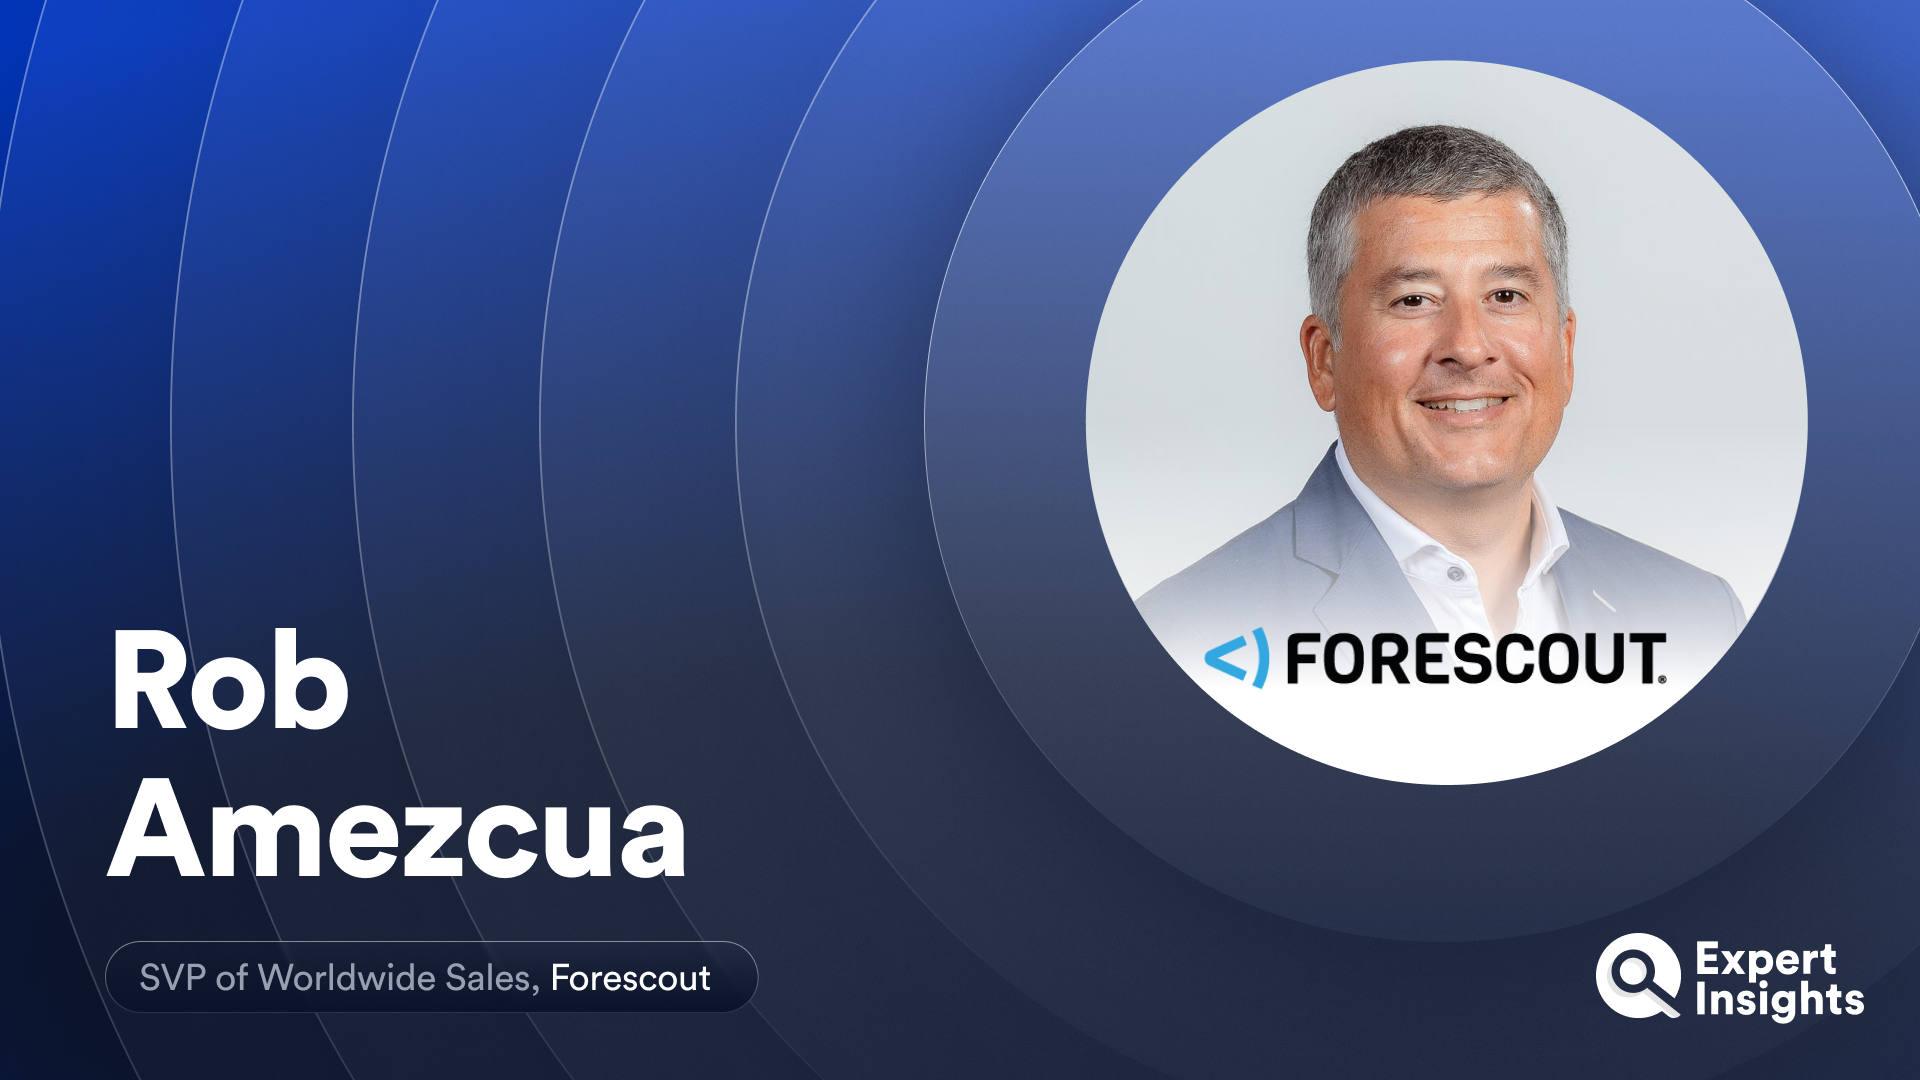 Expert Insights Interview With Rob Amezcua Of Forescout